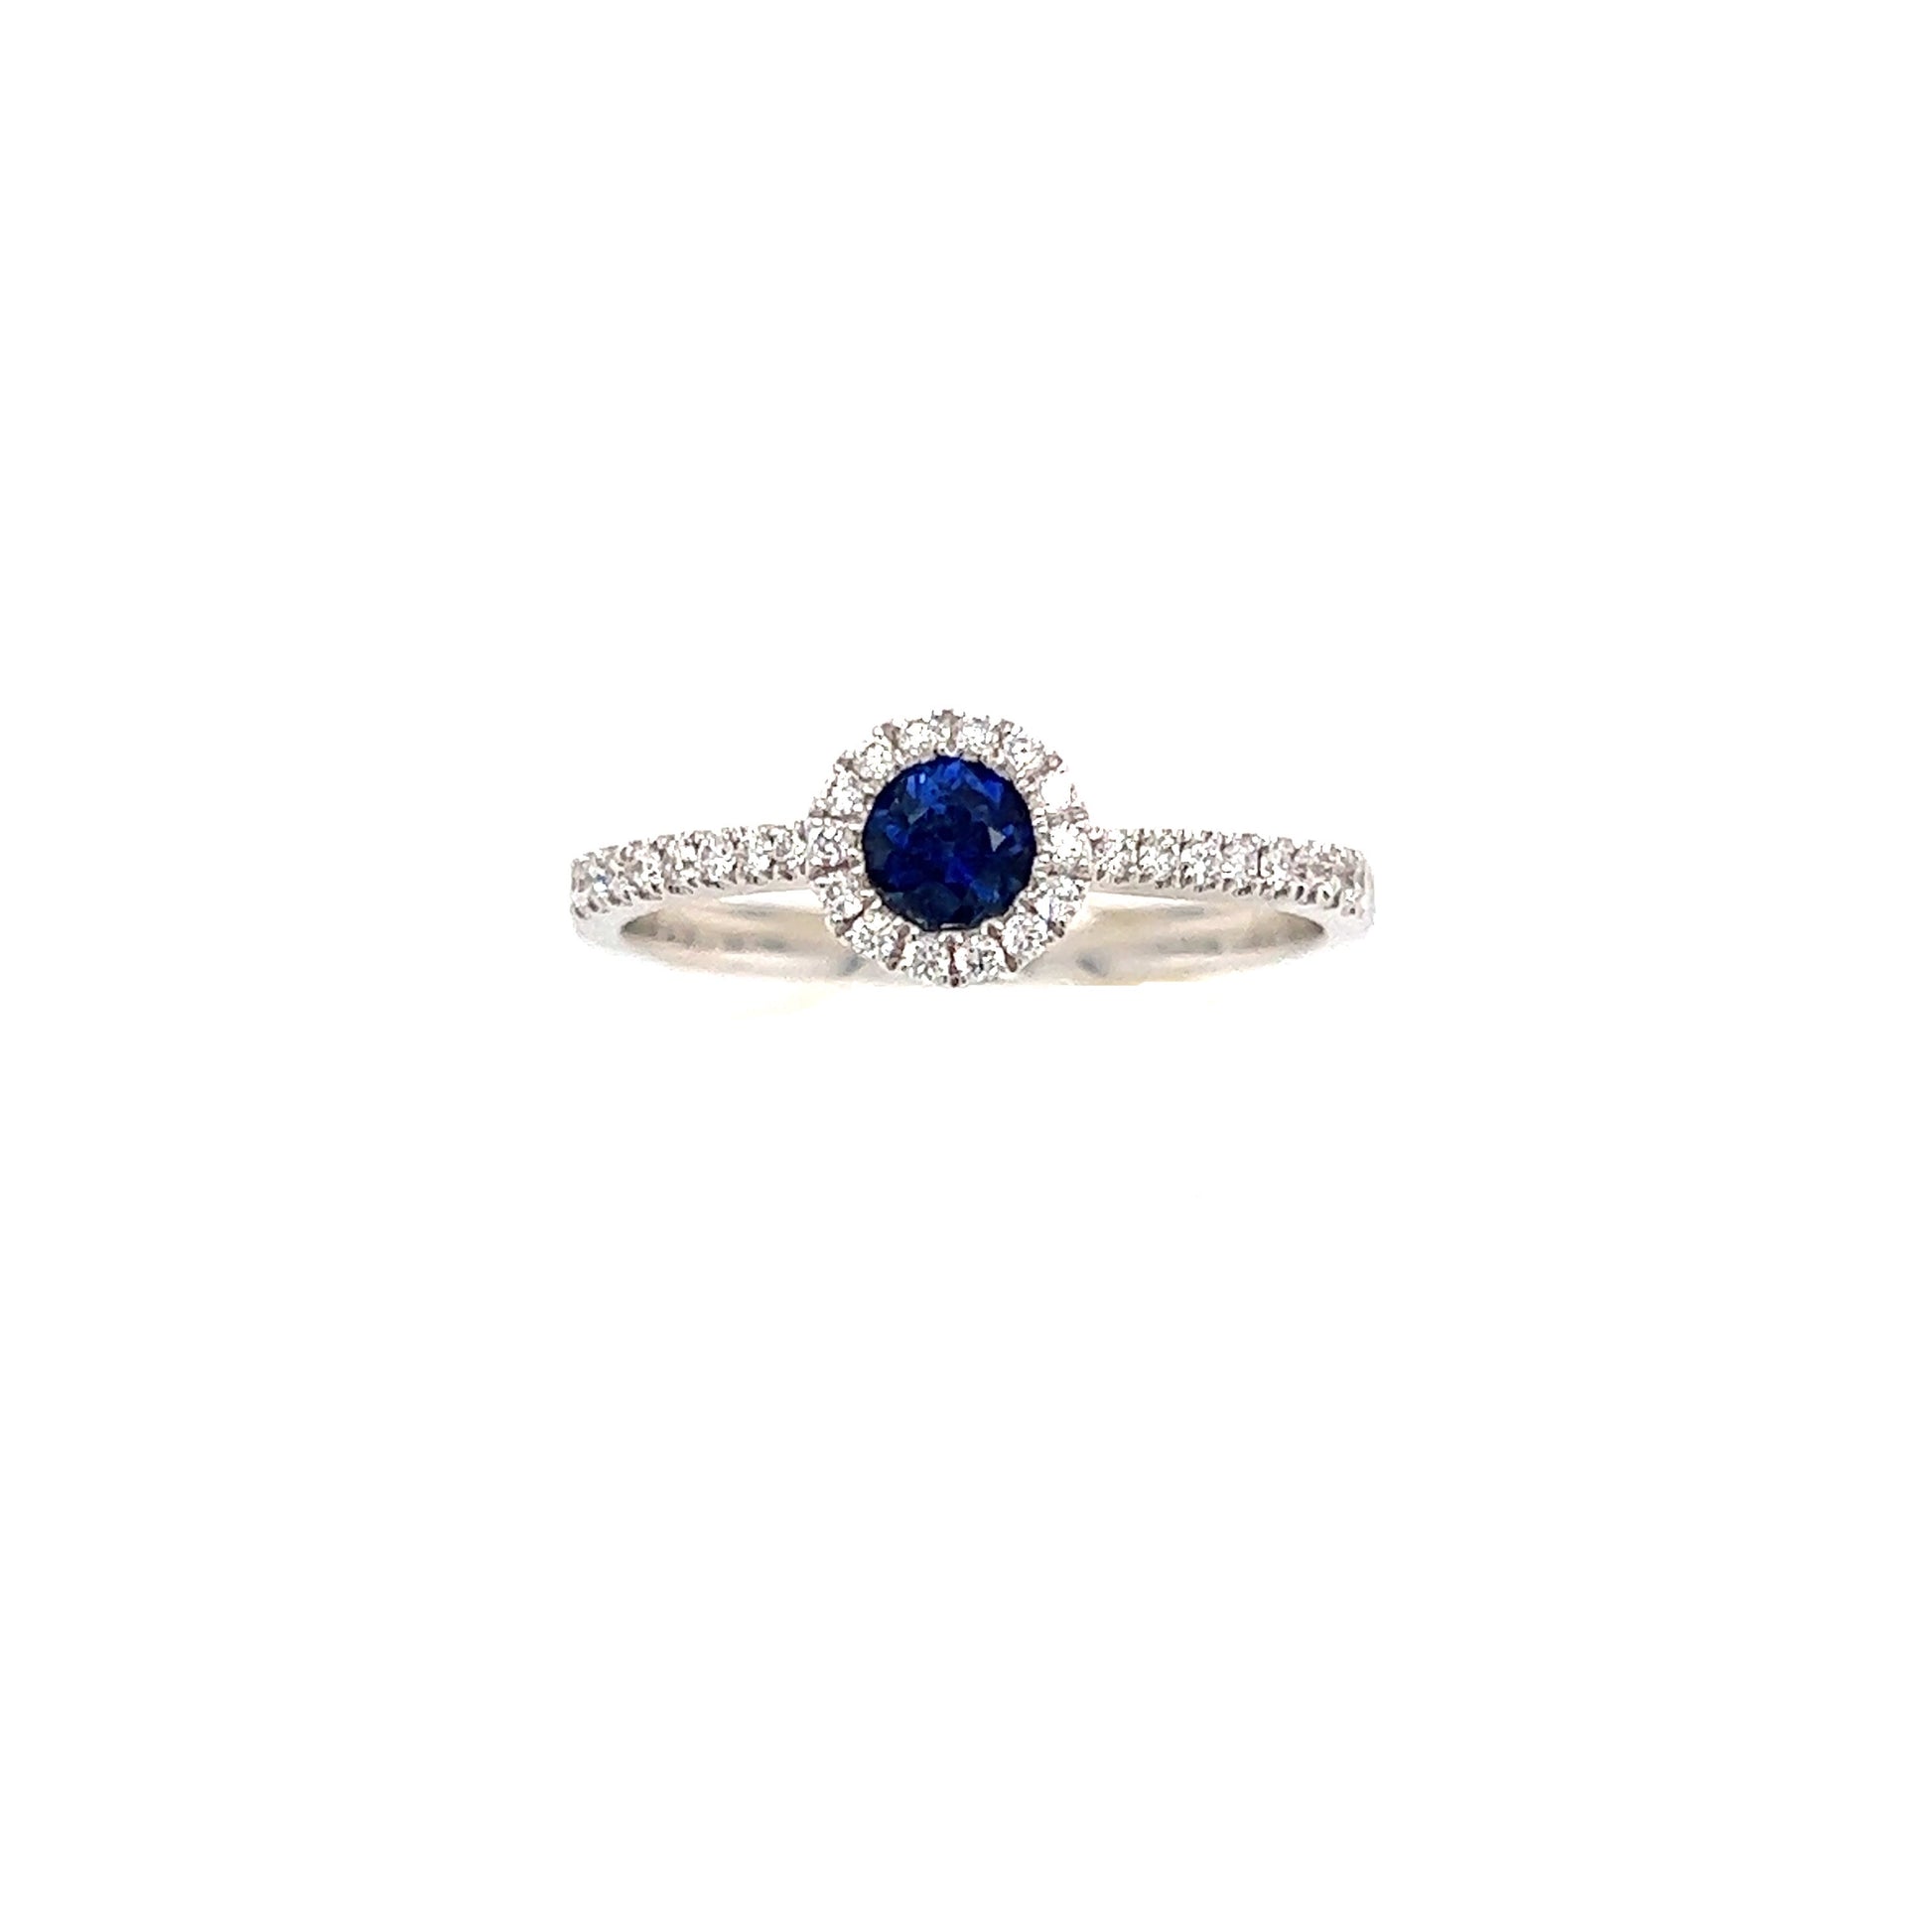 Sapphire Bezel Ring with Diamond Halo in 14K While Gold Front View Alternative